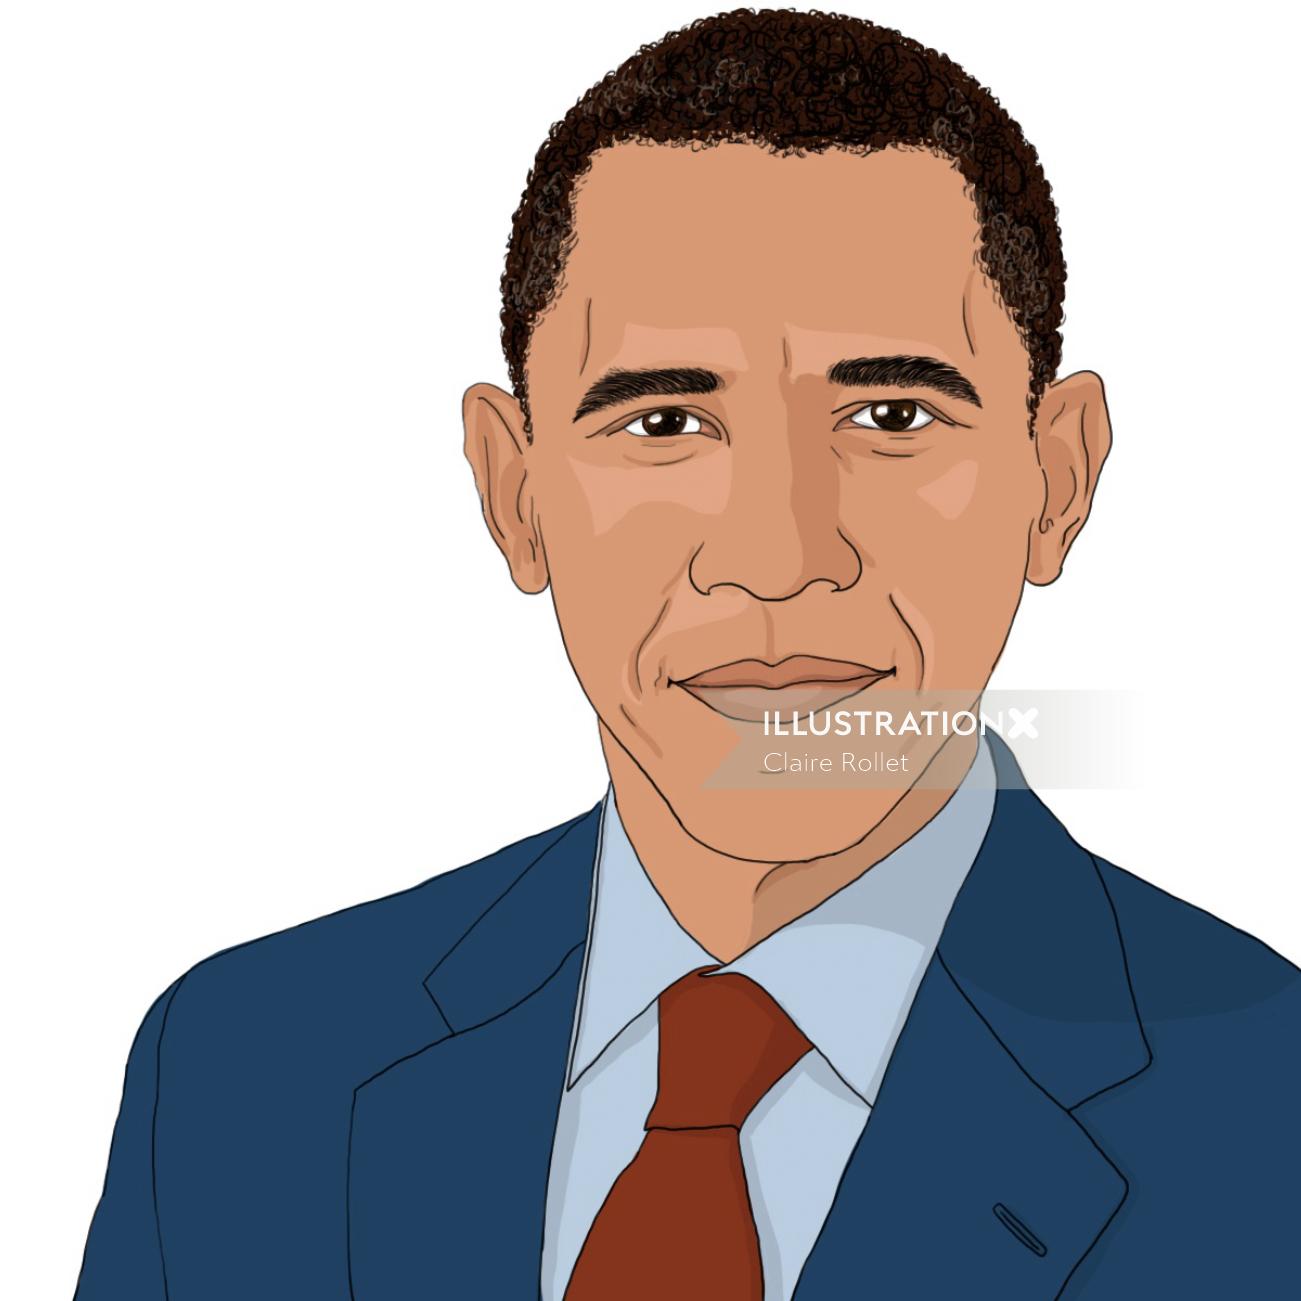 Portrait of Barack Obama in 2009 illustrated by Claire Rollet